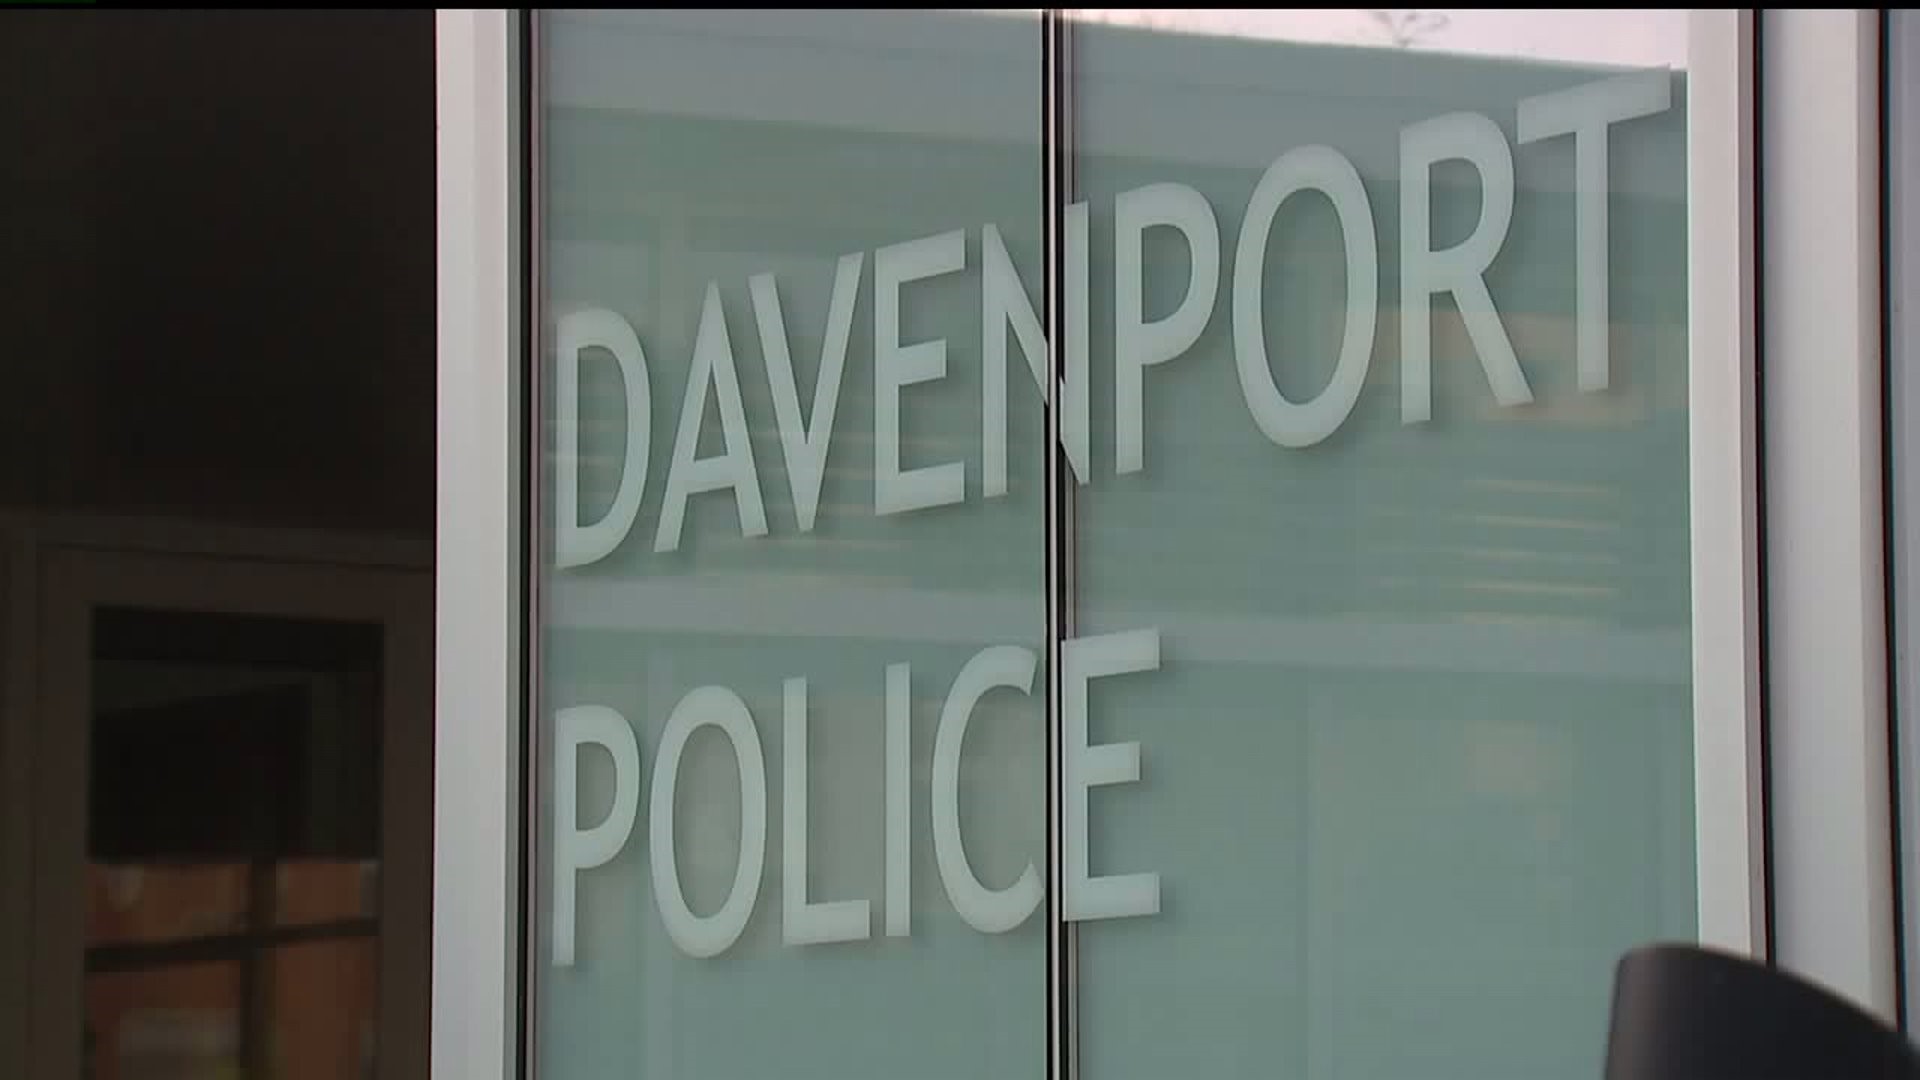 Davenport may not have facilitys to hold juvinilles connected to car thefts during epidemic